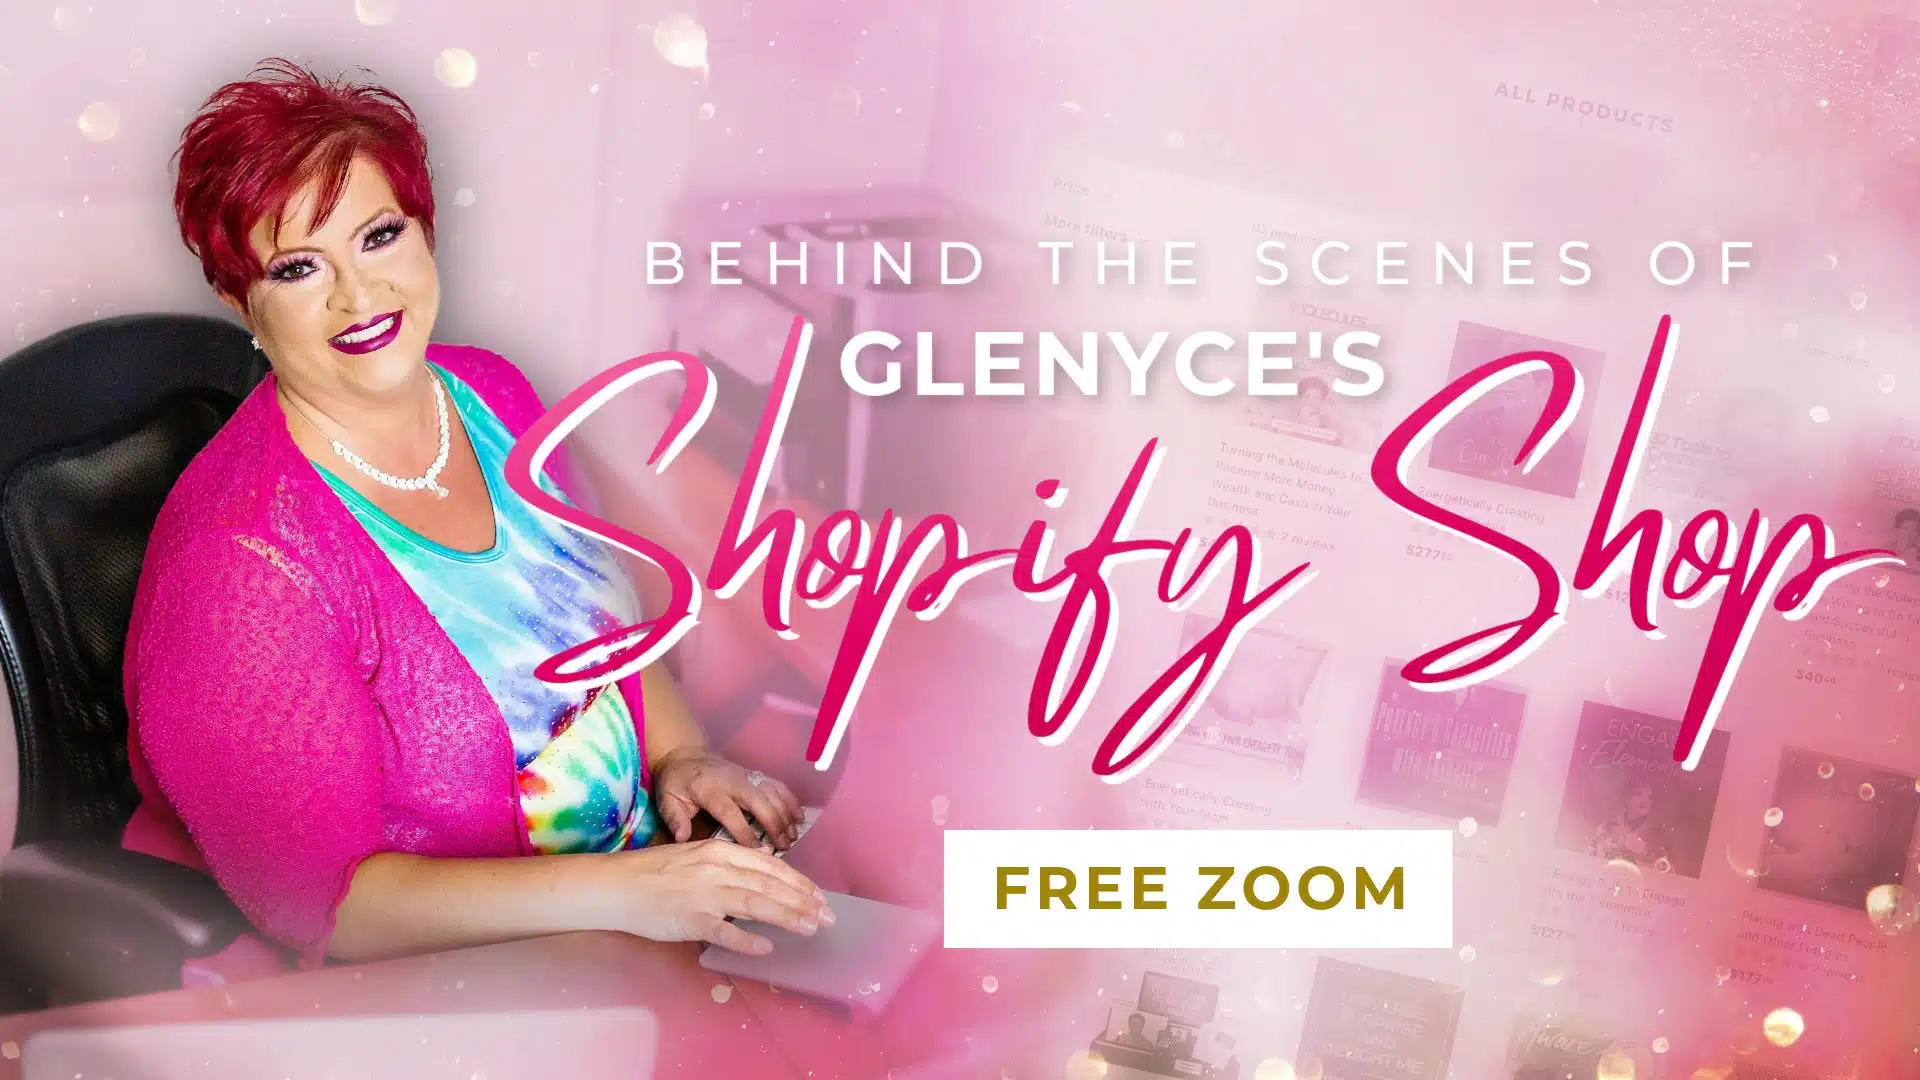 Behind the Scenes of Glenyce's Shopify Shop